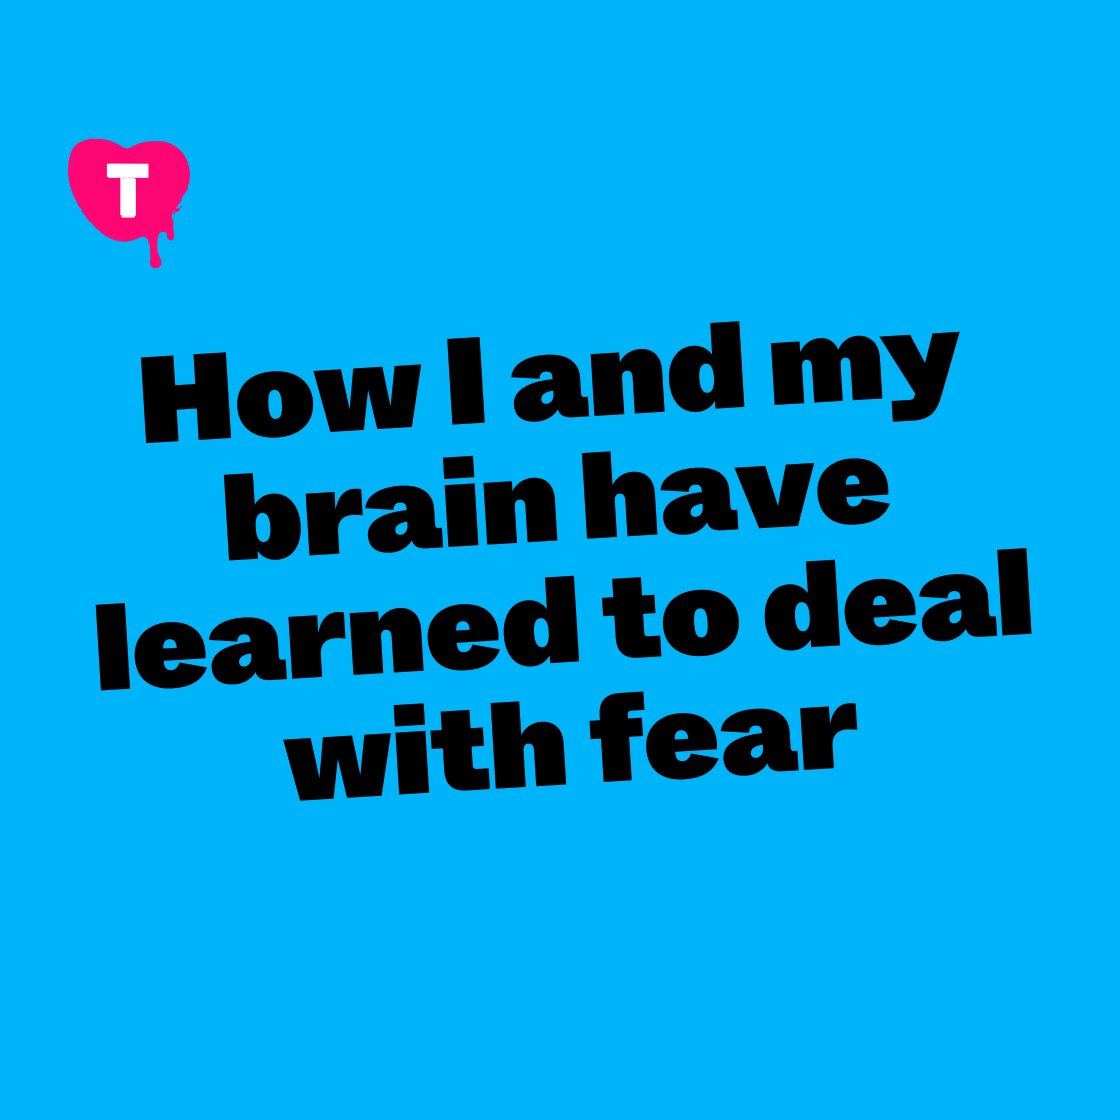 How I and my brain have learned to deal with fear